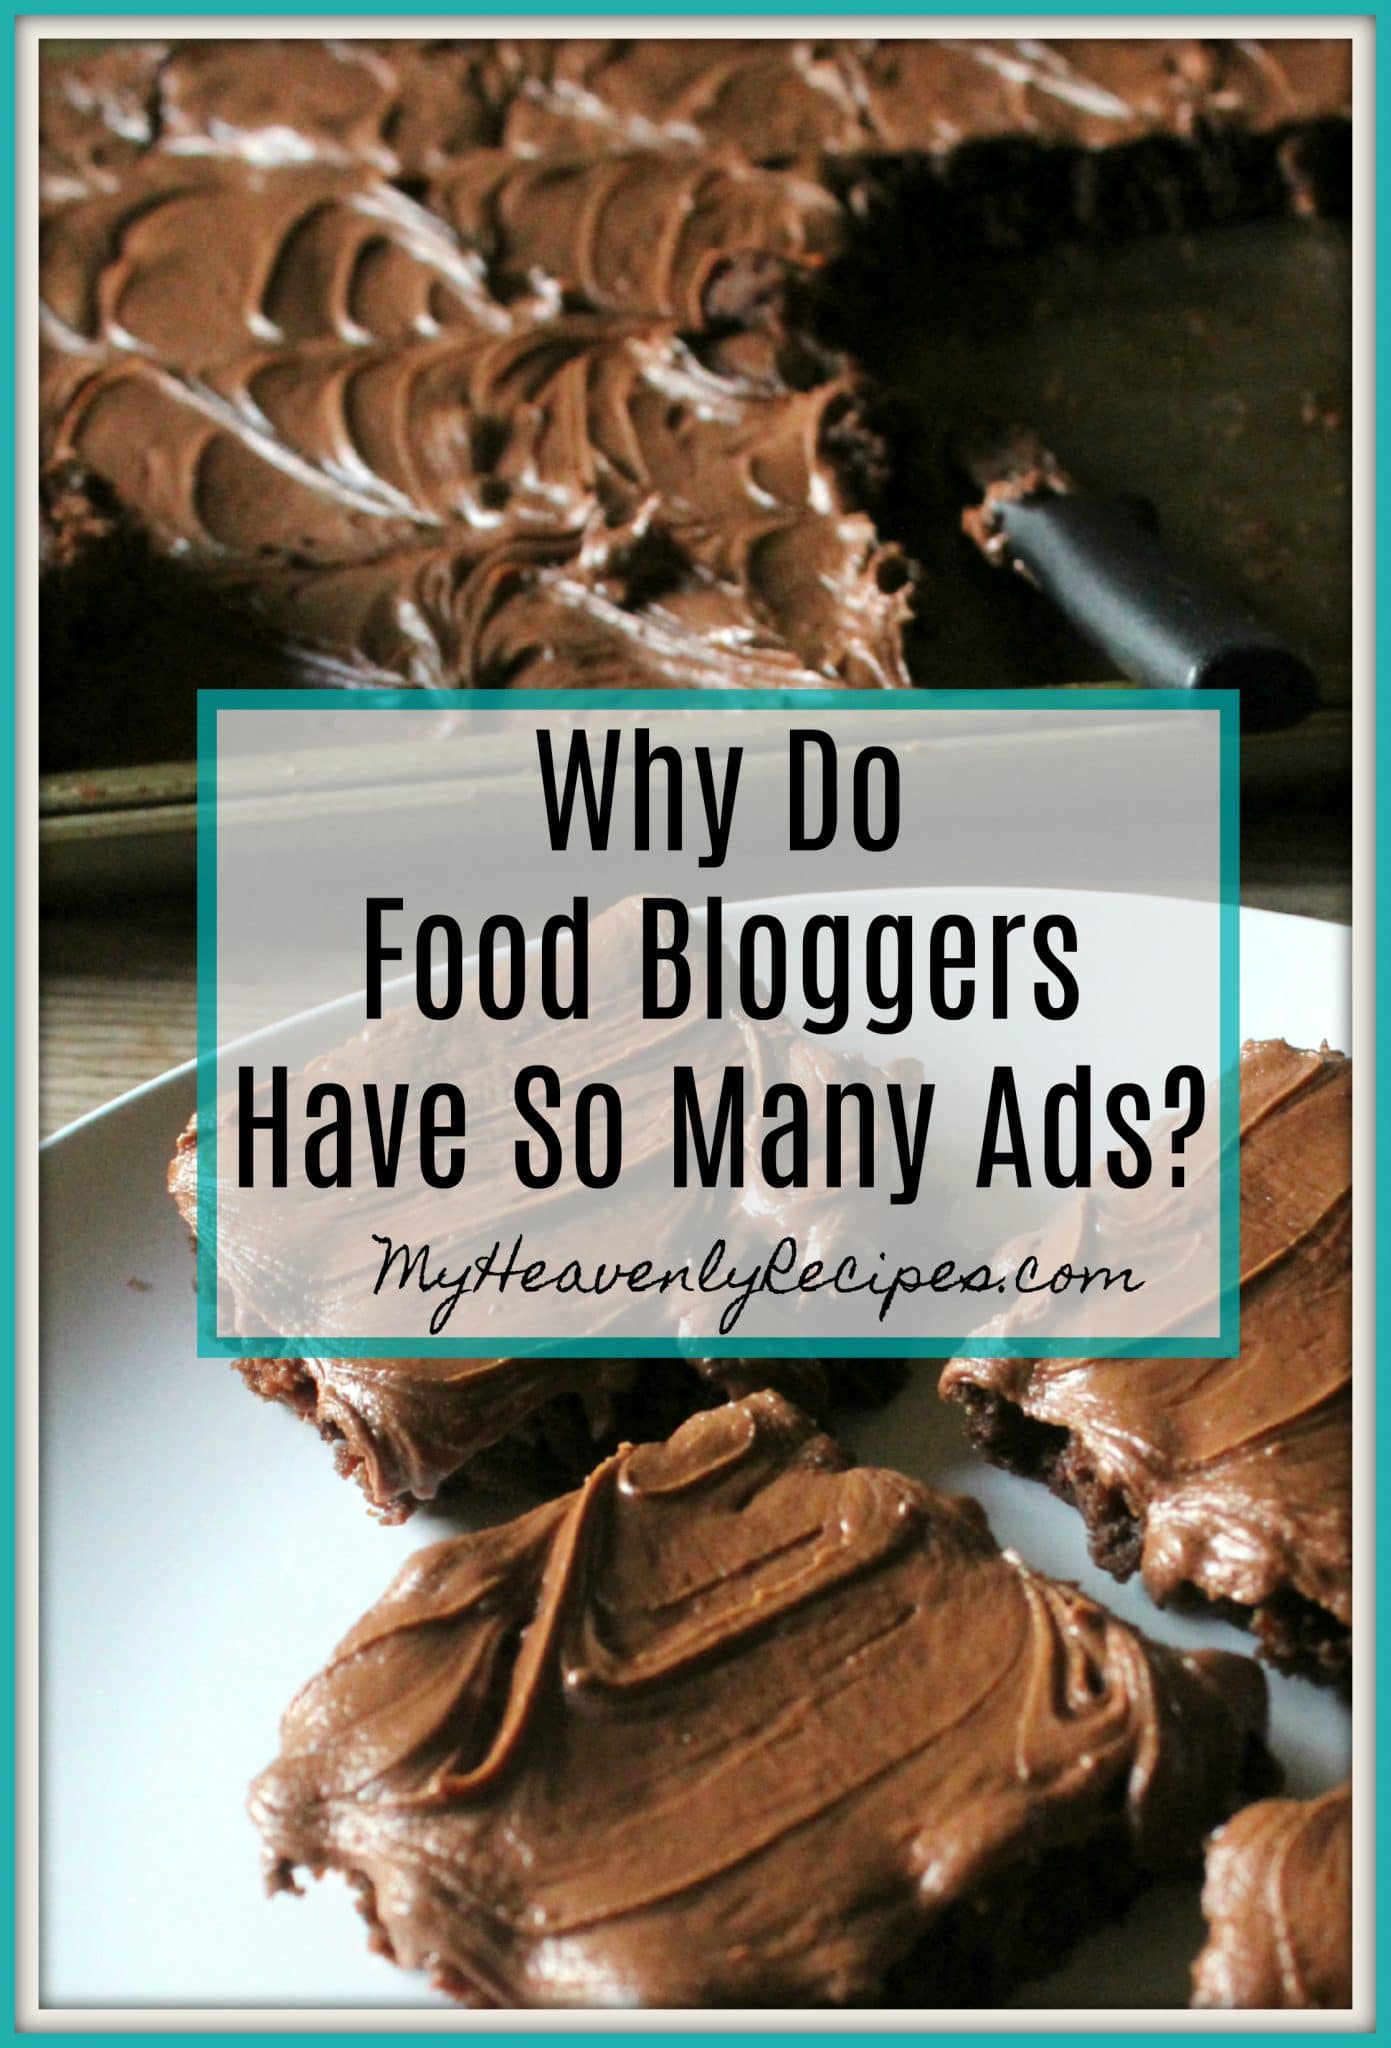 Why Do Food Bloggers Have So Many Ads